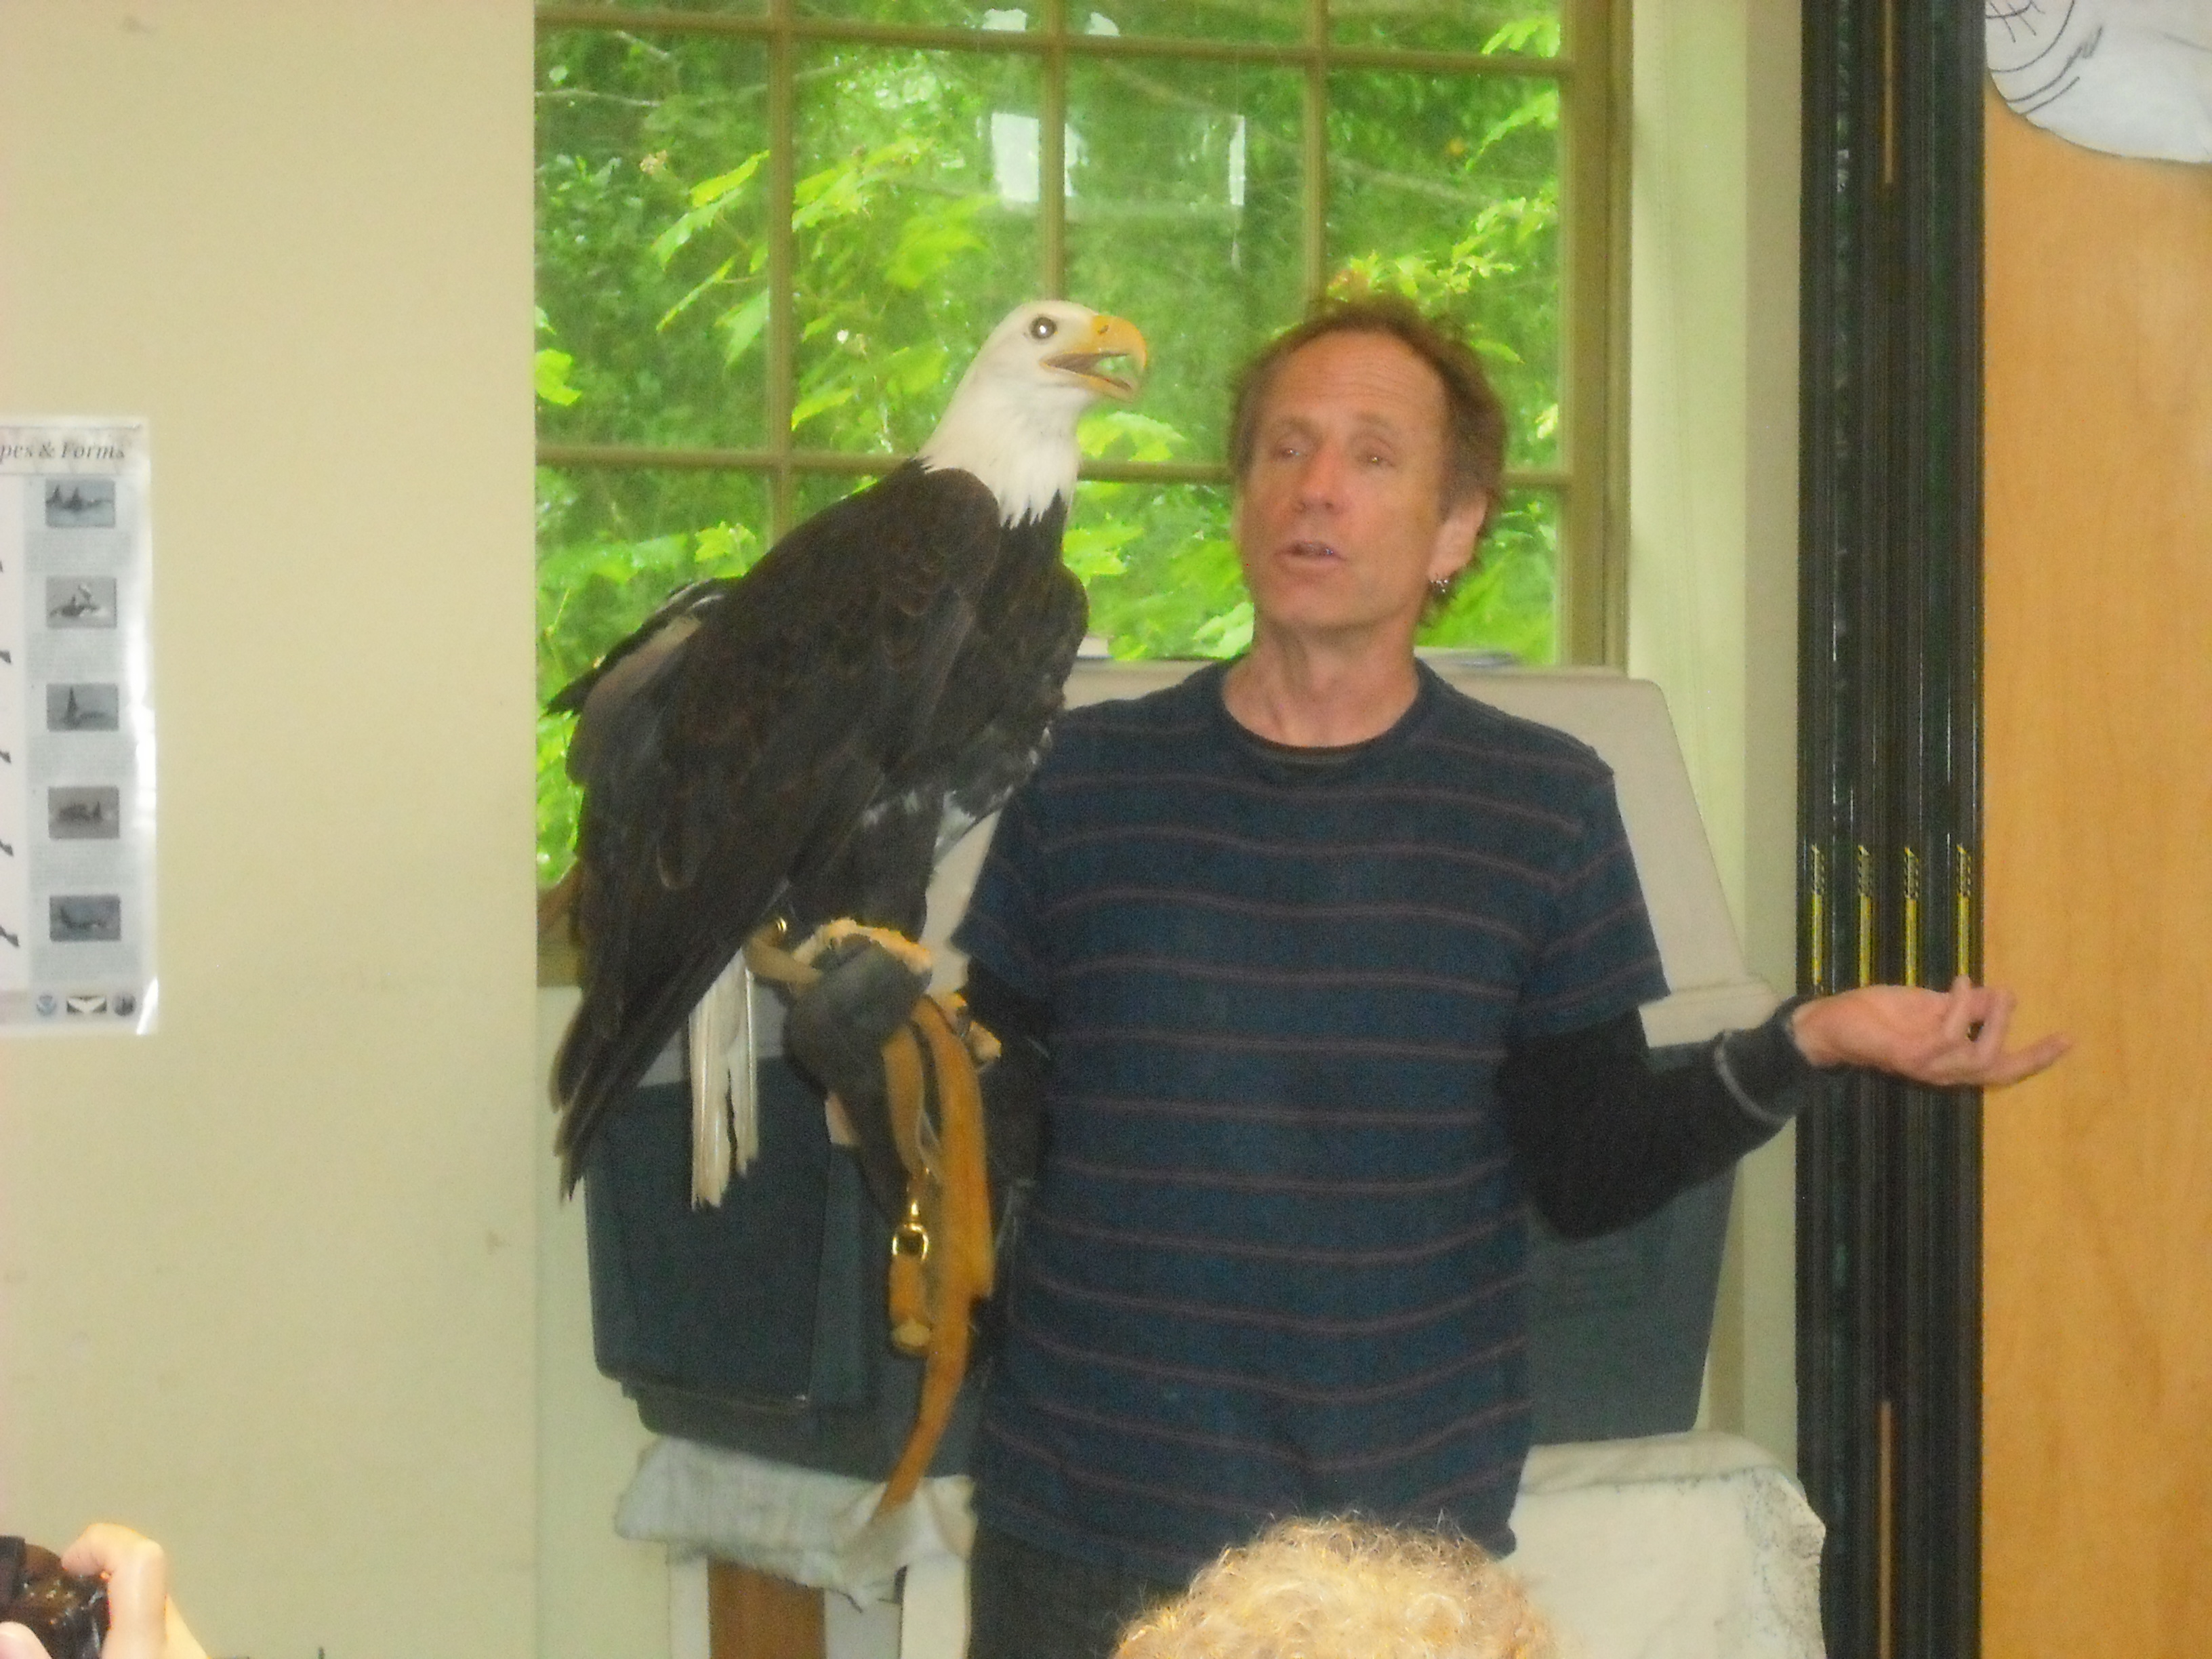 Jeff Guidry holds an eagle named Freedom at the Marine Science Center in Port Townsend. Margaret McKenzie/Peninsula Daily News